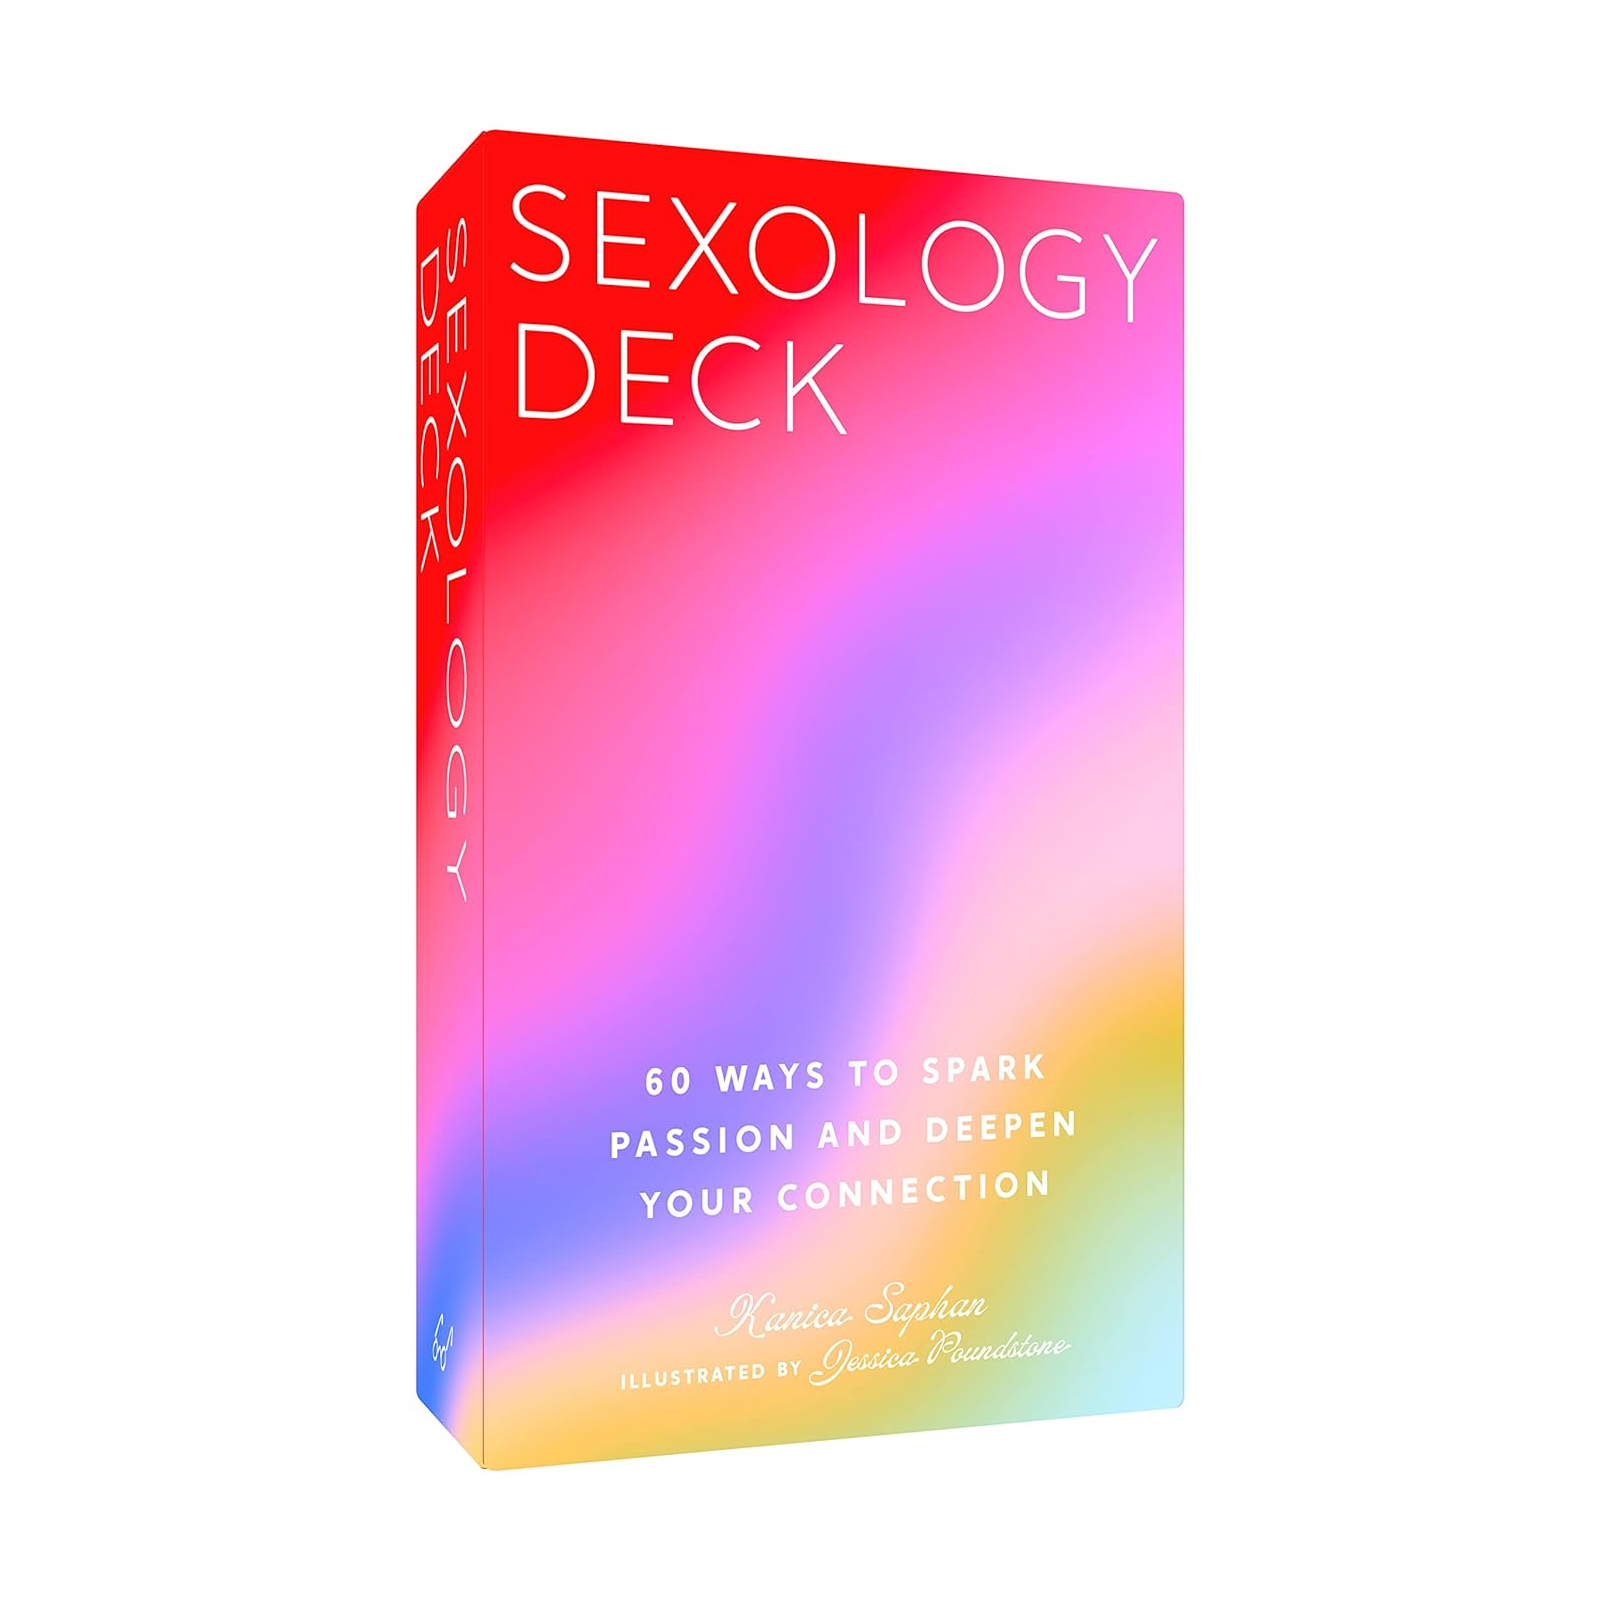 Sexology Deck: 60 Ways to Spark Passion and Deepen Your Connection